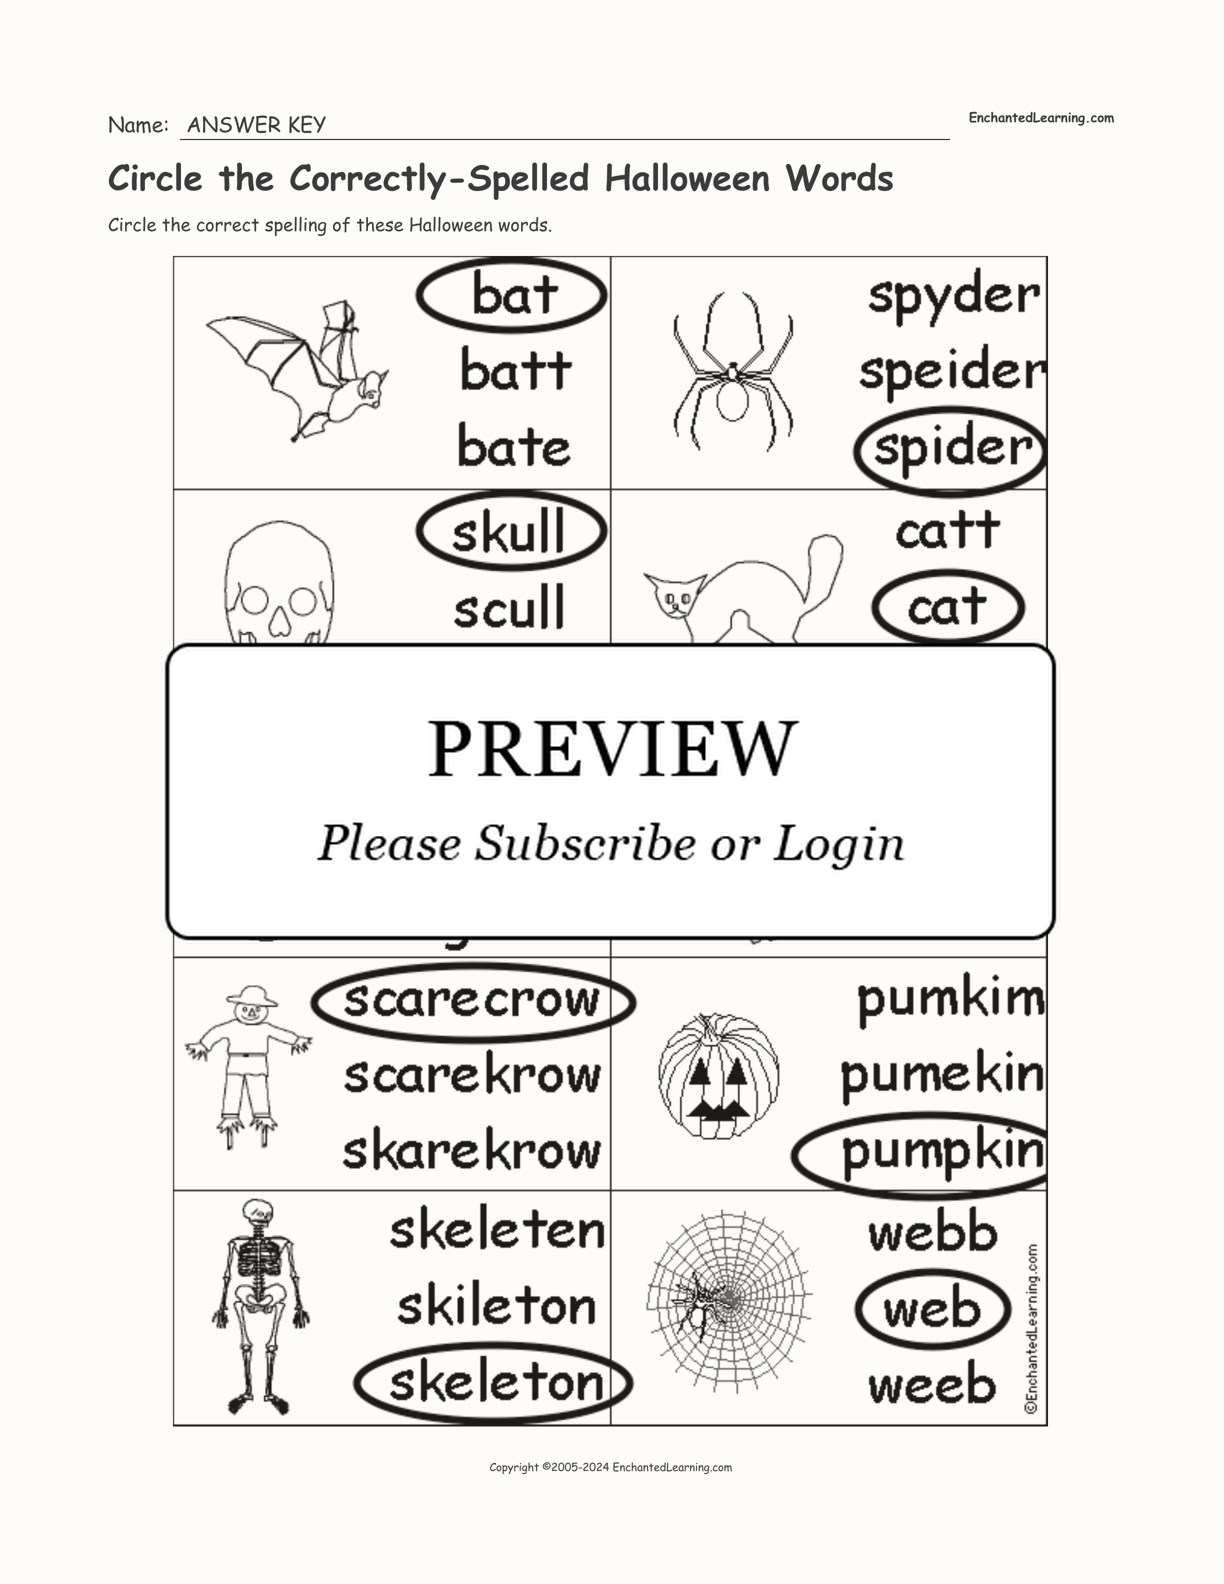 Circle the Correctly-Spelled Halloween Words interactive worksheet page 2